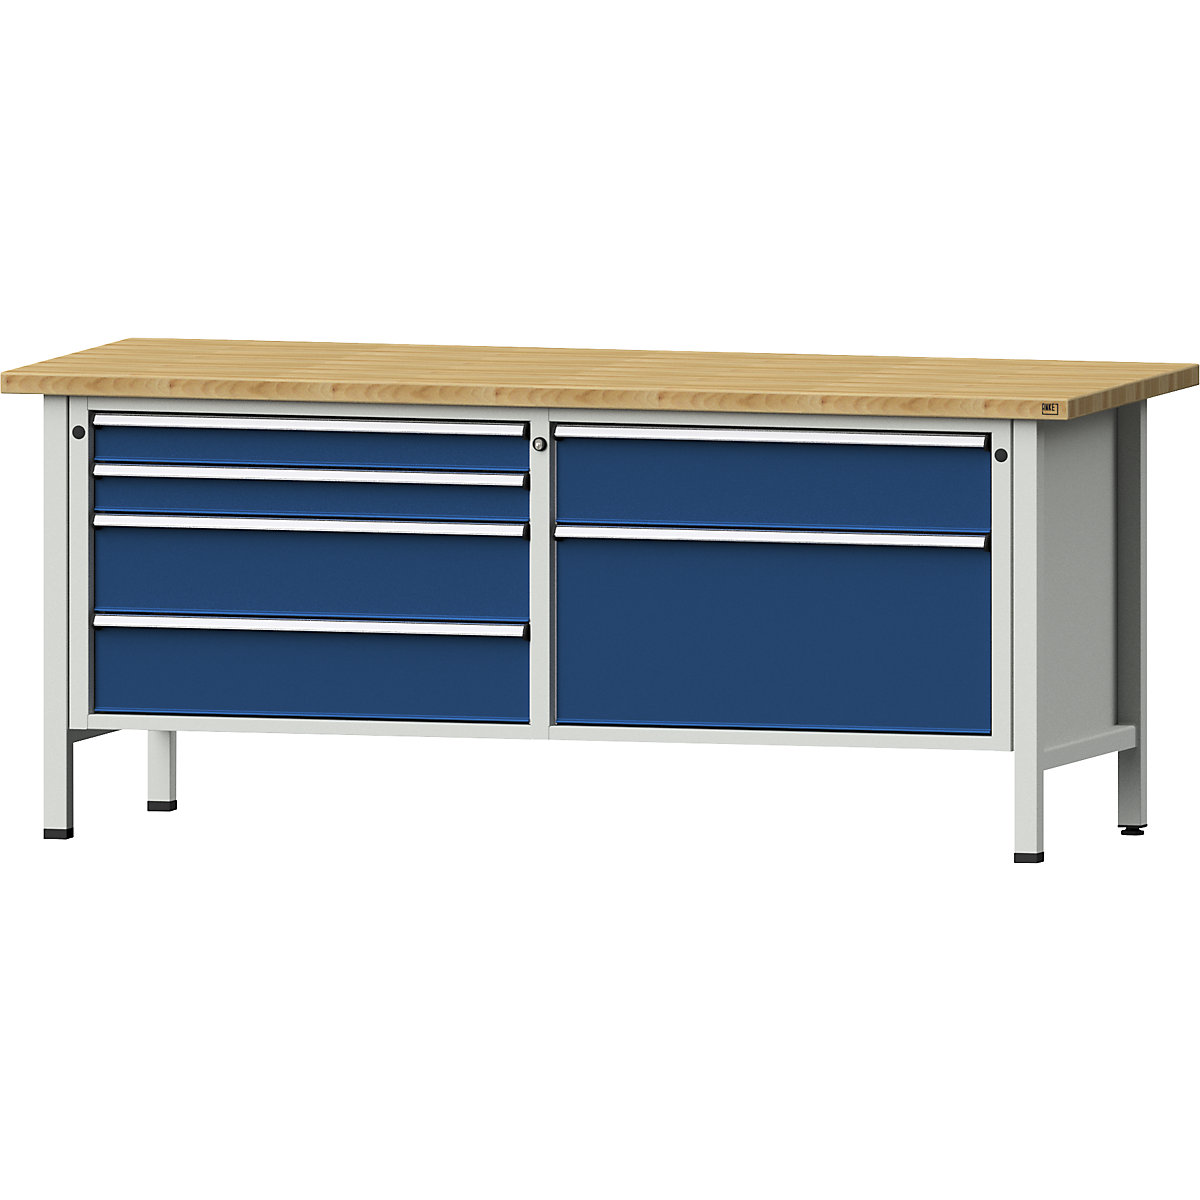 Workbenches 2000 mm wide, frame construction – ANKE, 6 drawers, solid beech worktop, height 840 mm-10